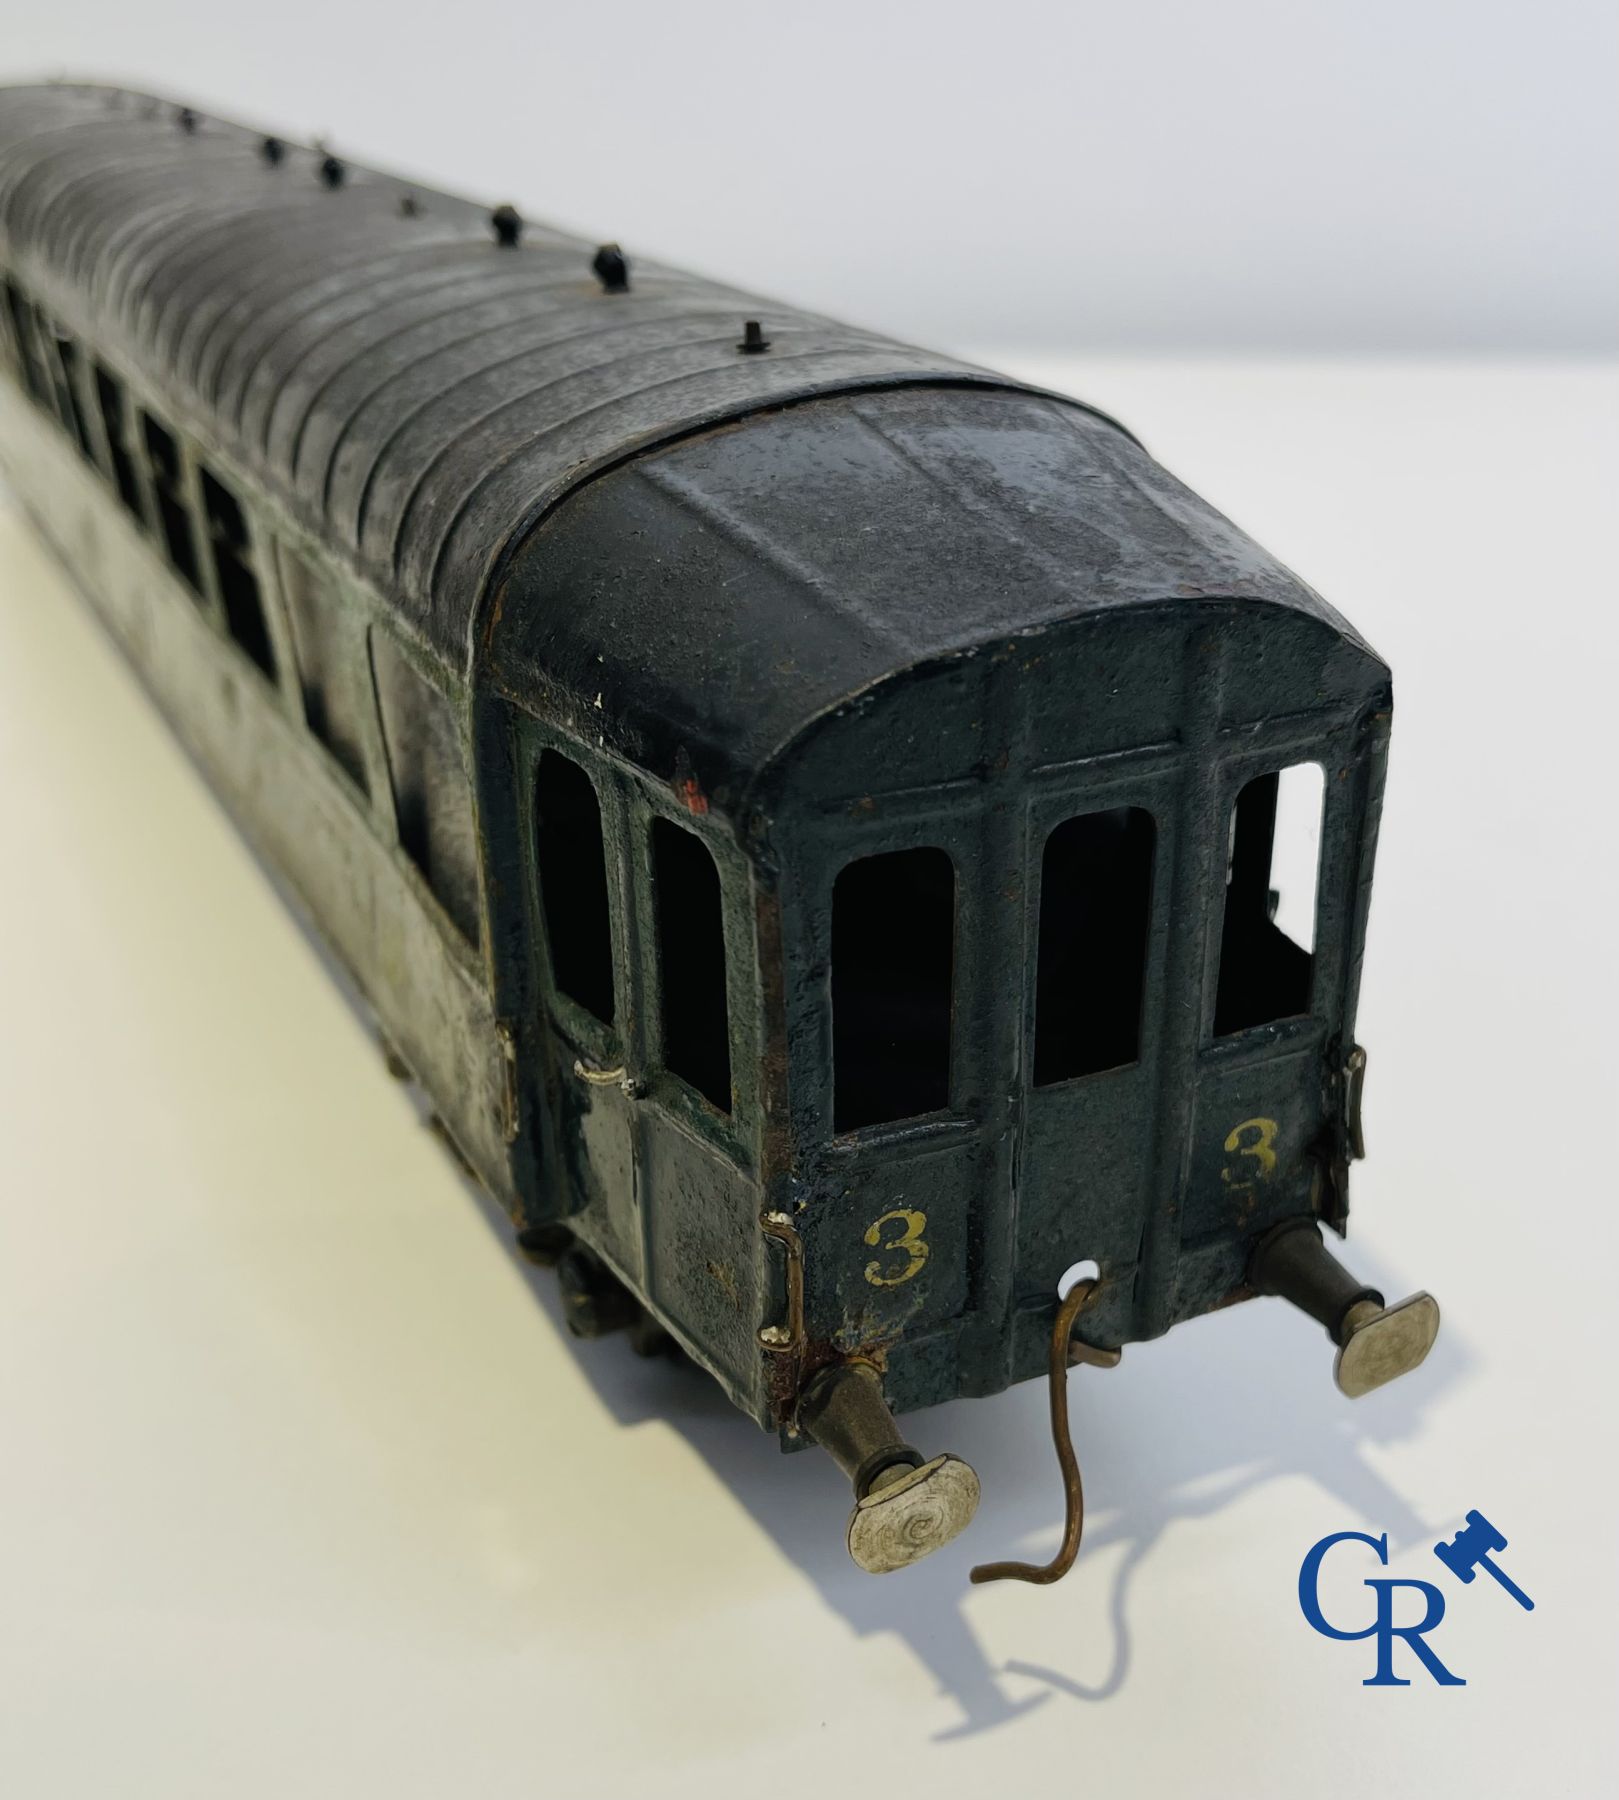 Old toys: Märklin, Locomotive with towing tender and dining car.
About 1930. - Image 22 of 32